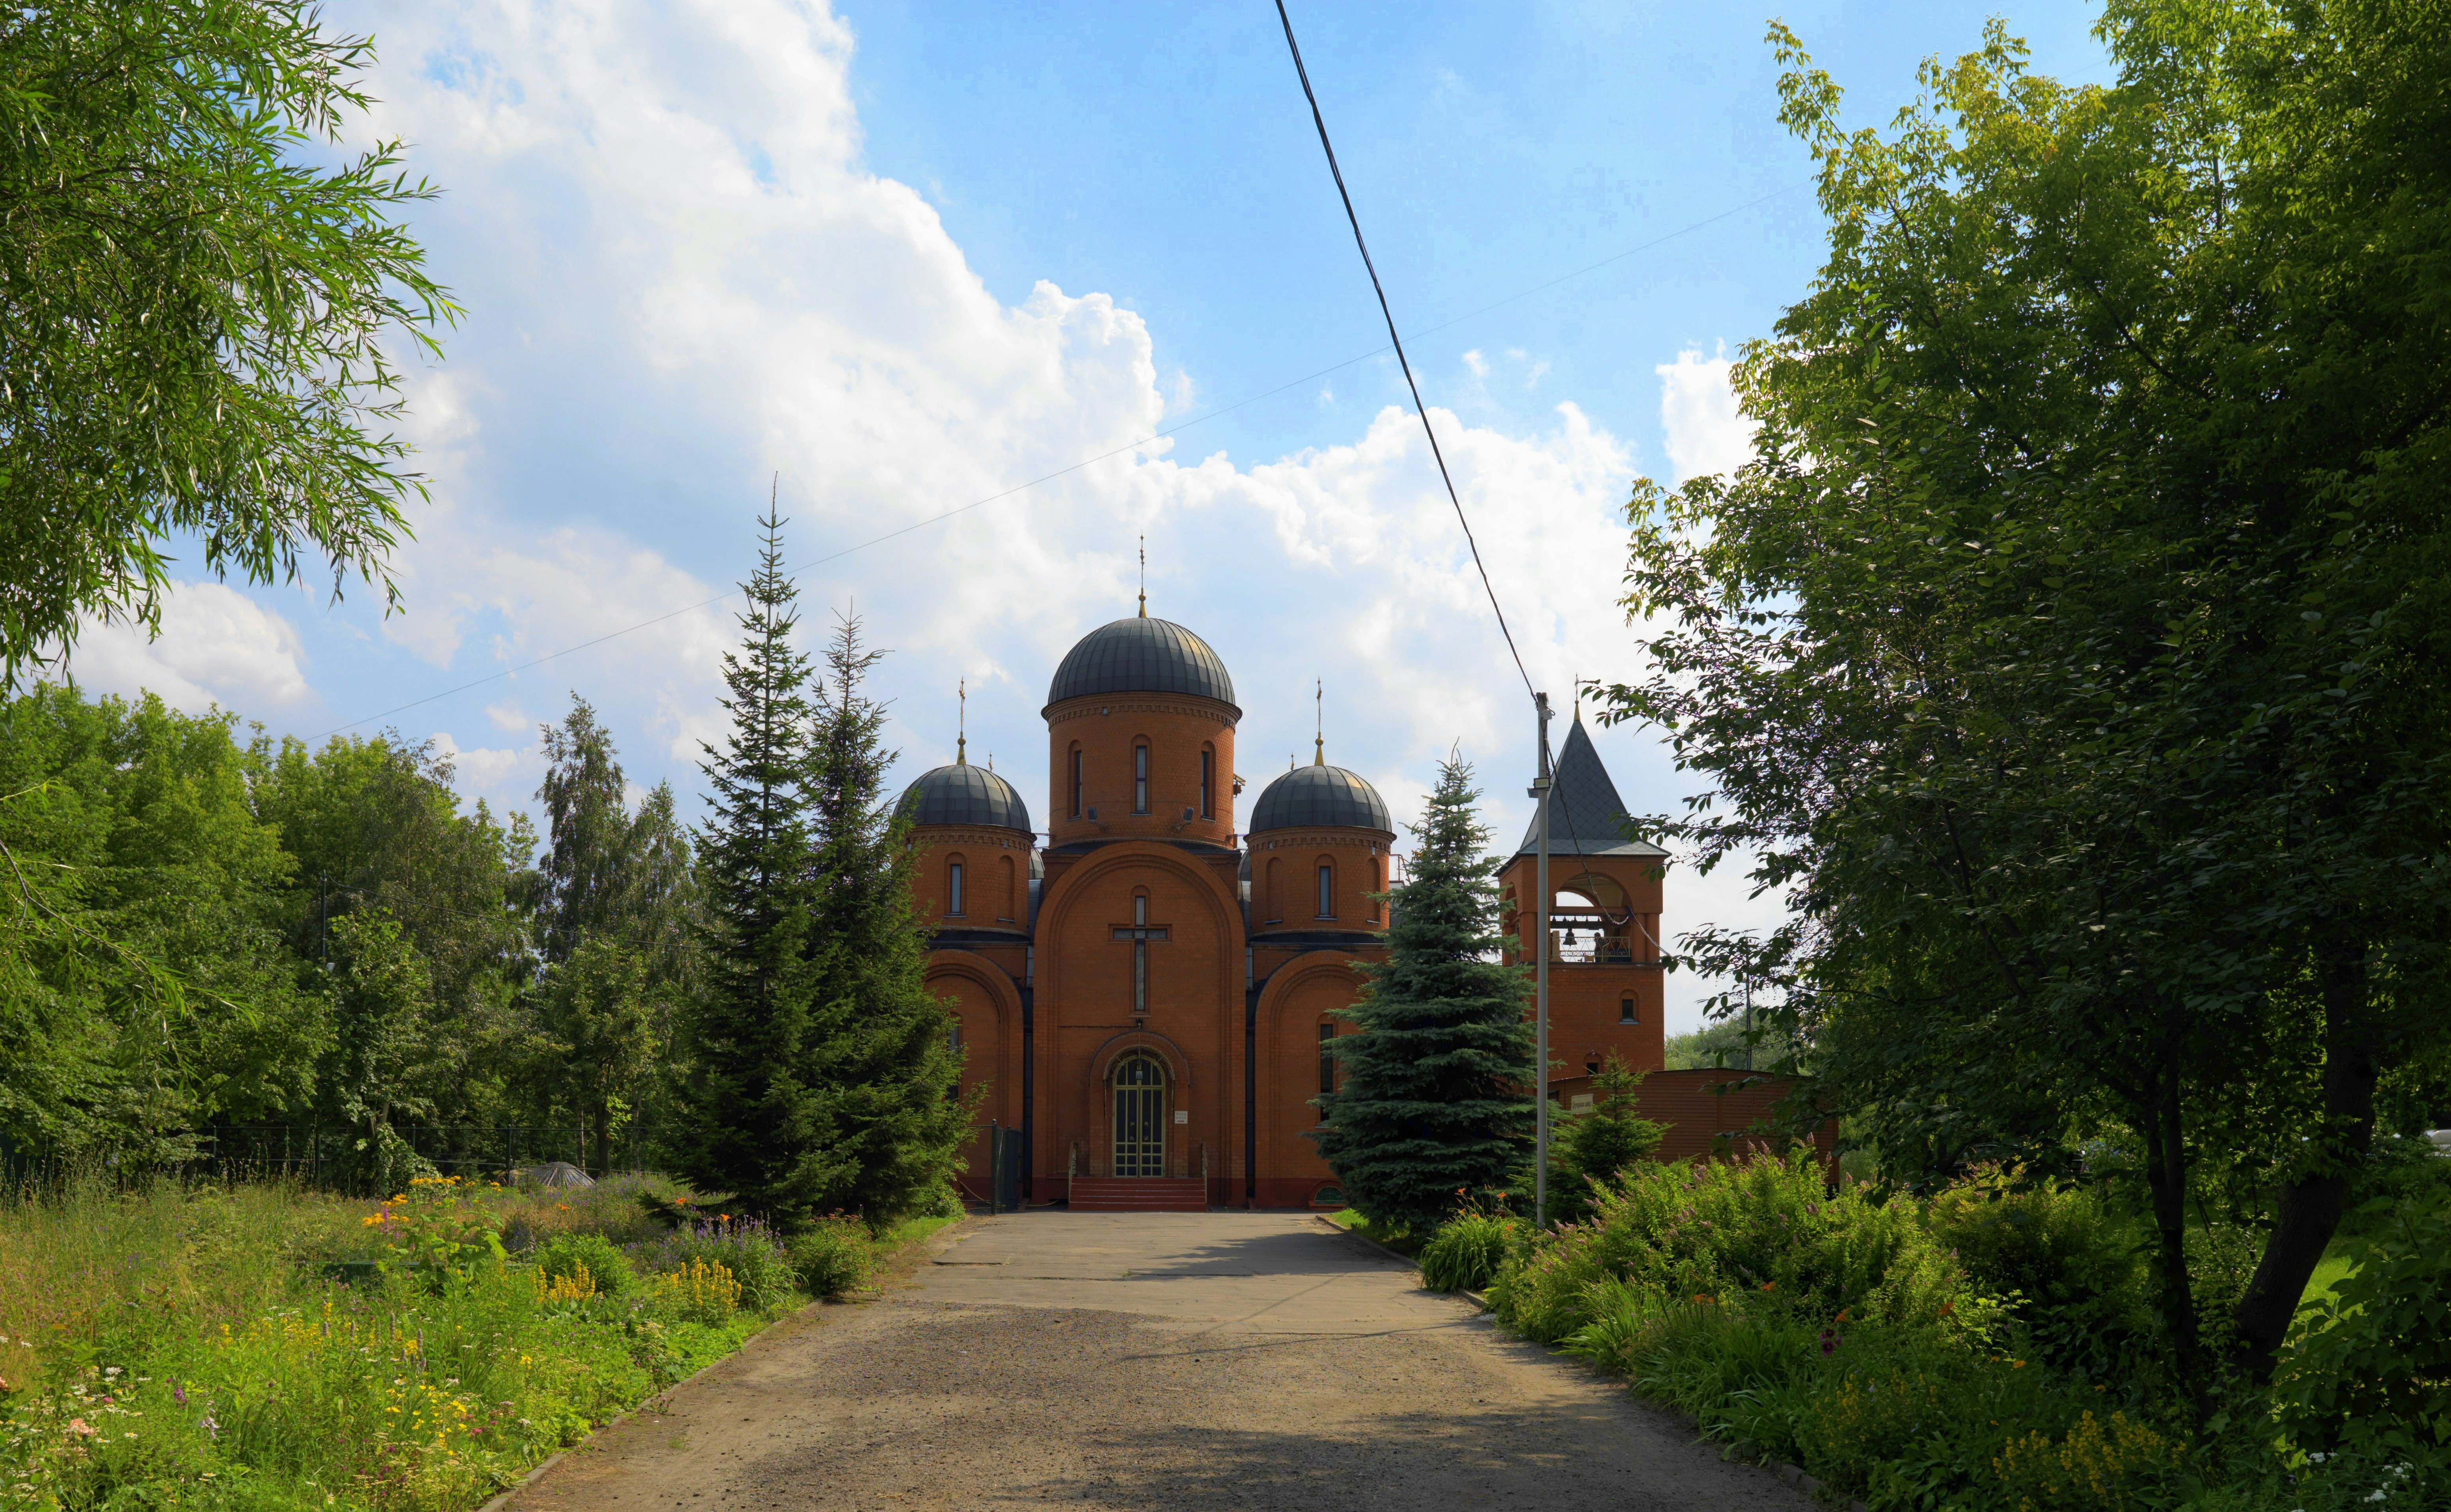 #misura_photos #misuraphotos https://www.youtube.com/user/Moscowartgallery vk.com/scanart From the series #Spiritualcentersofmoscow Church of St. Nicholas of Myra in Otradnoe if you like my works, I have more on my profile page - Please check them out! Don't forget to subscribe, press a like button, add my photo to your collections, share it with your friends and download it if you like! See you!